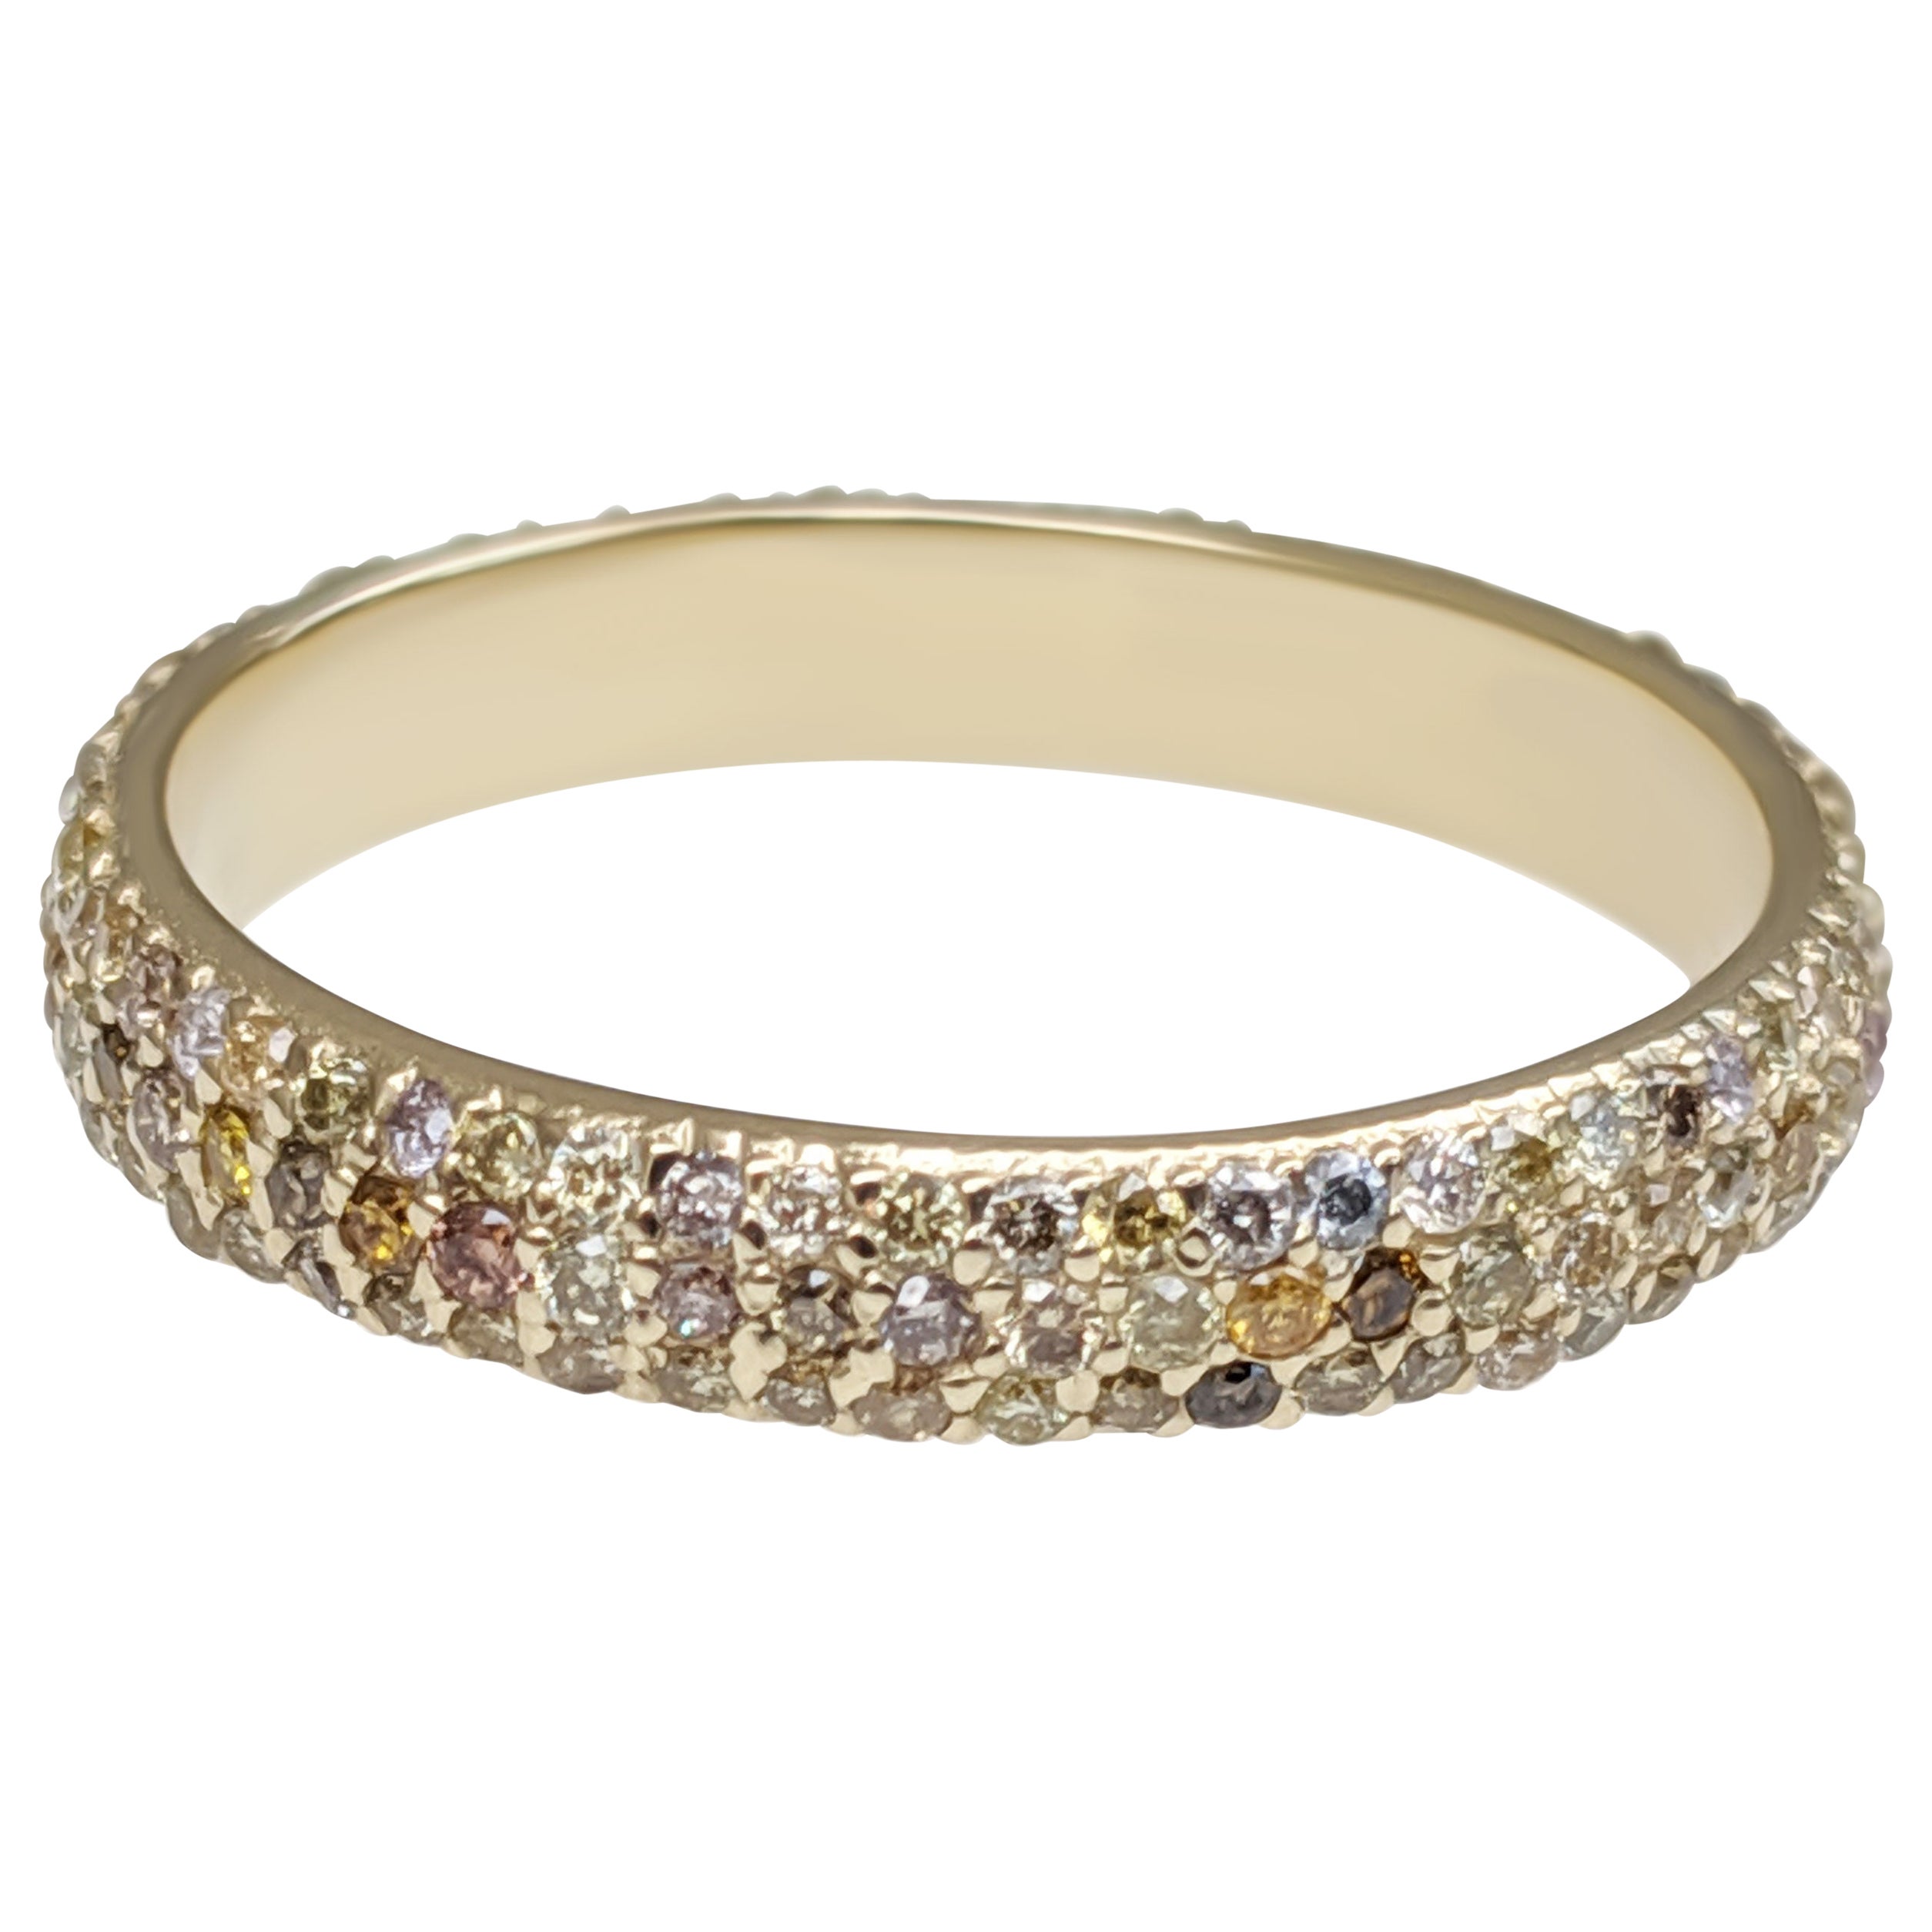 NO RESERVE! 1.01Ct Fancy Diamonds Eternity Band - 14 kt. Yellow gold - Ring